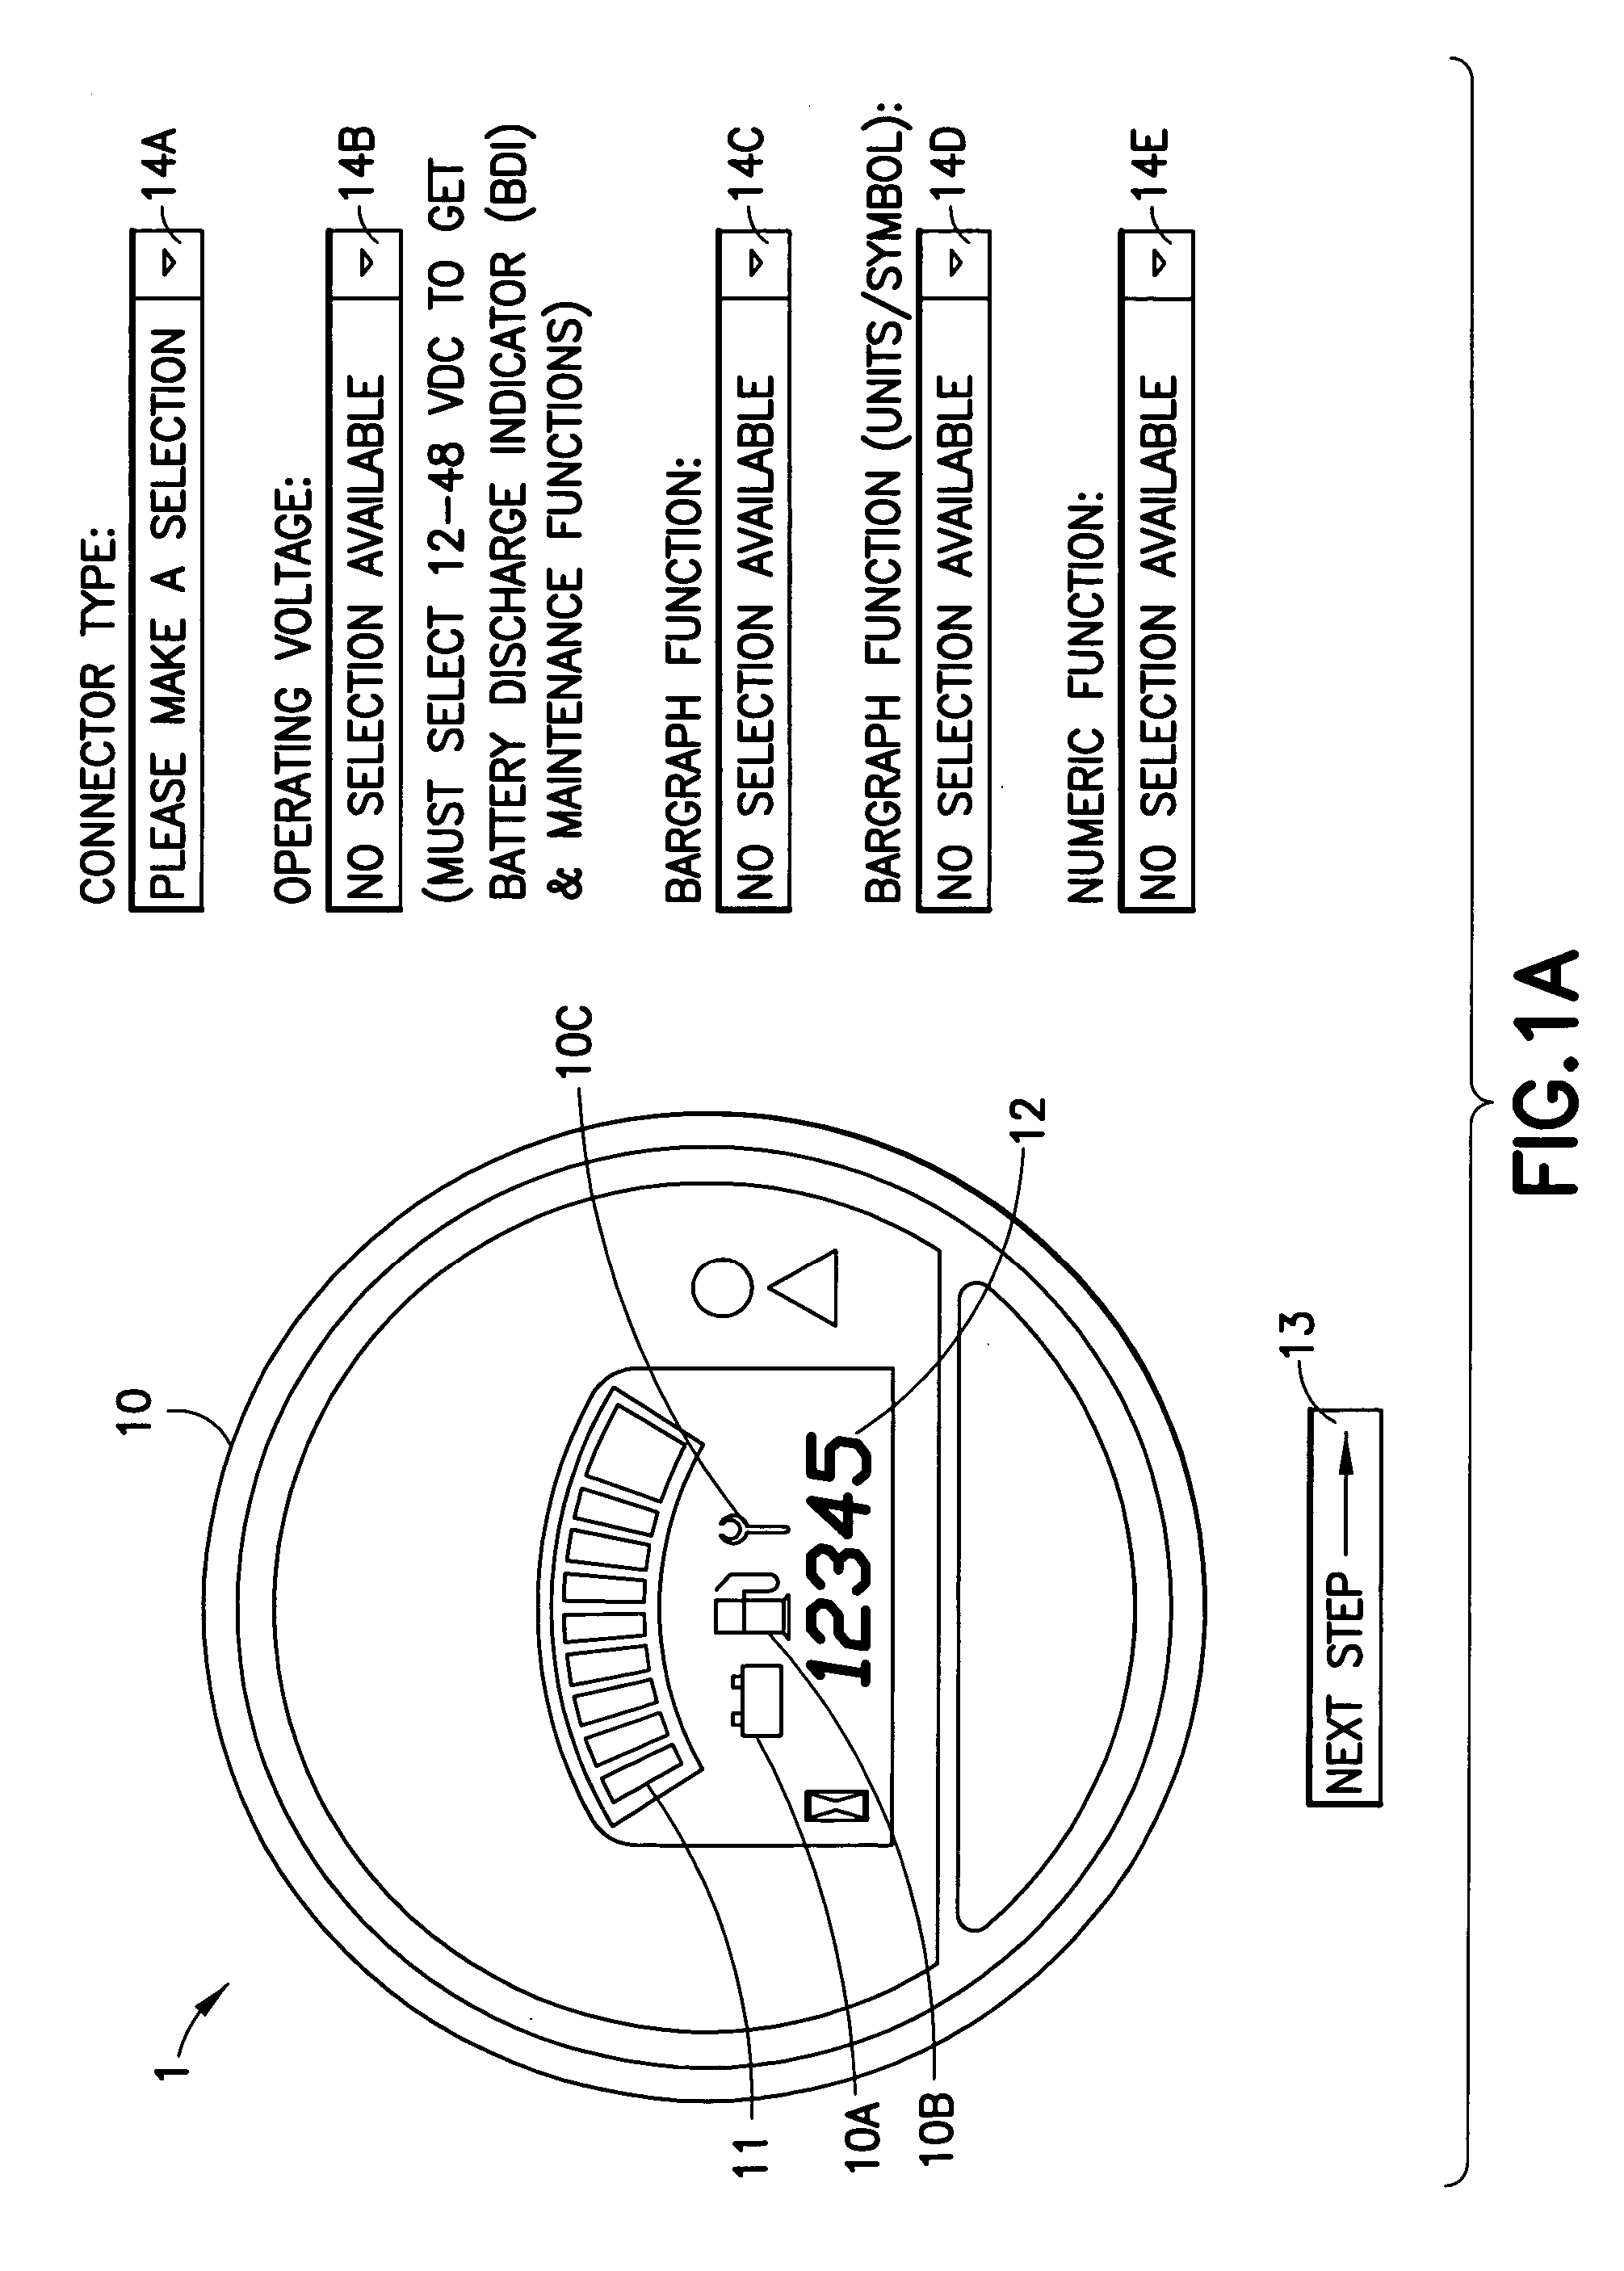 Method and apparatus for web-based configuration of instrumentation, and business methods employing same